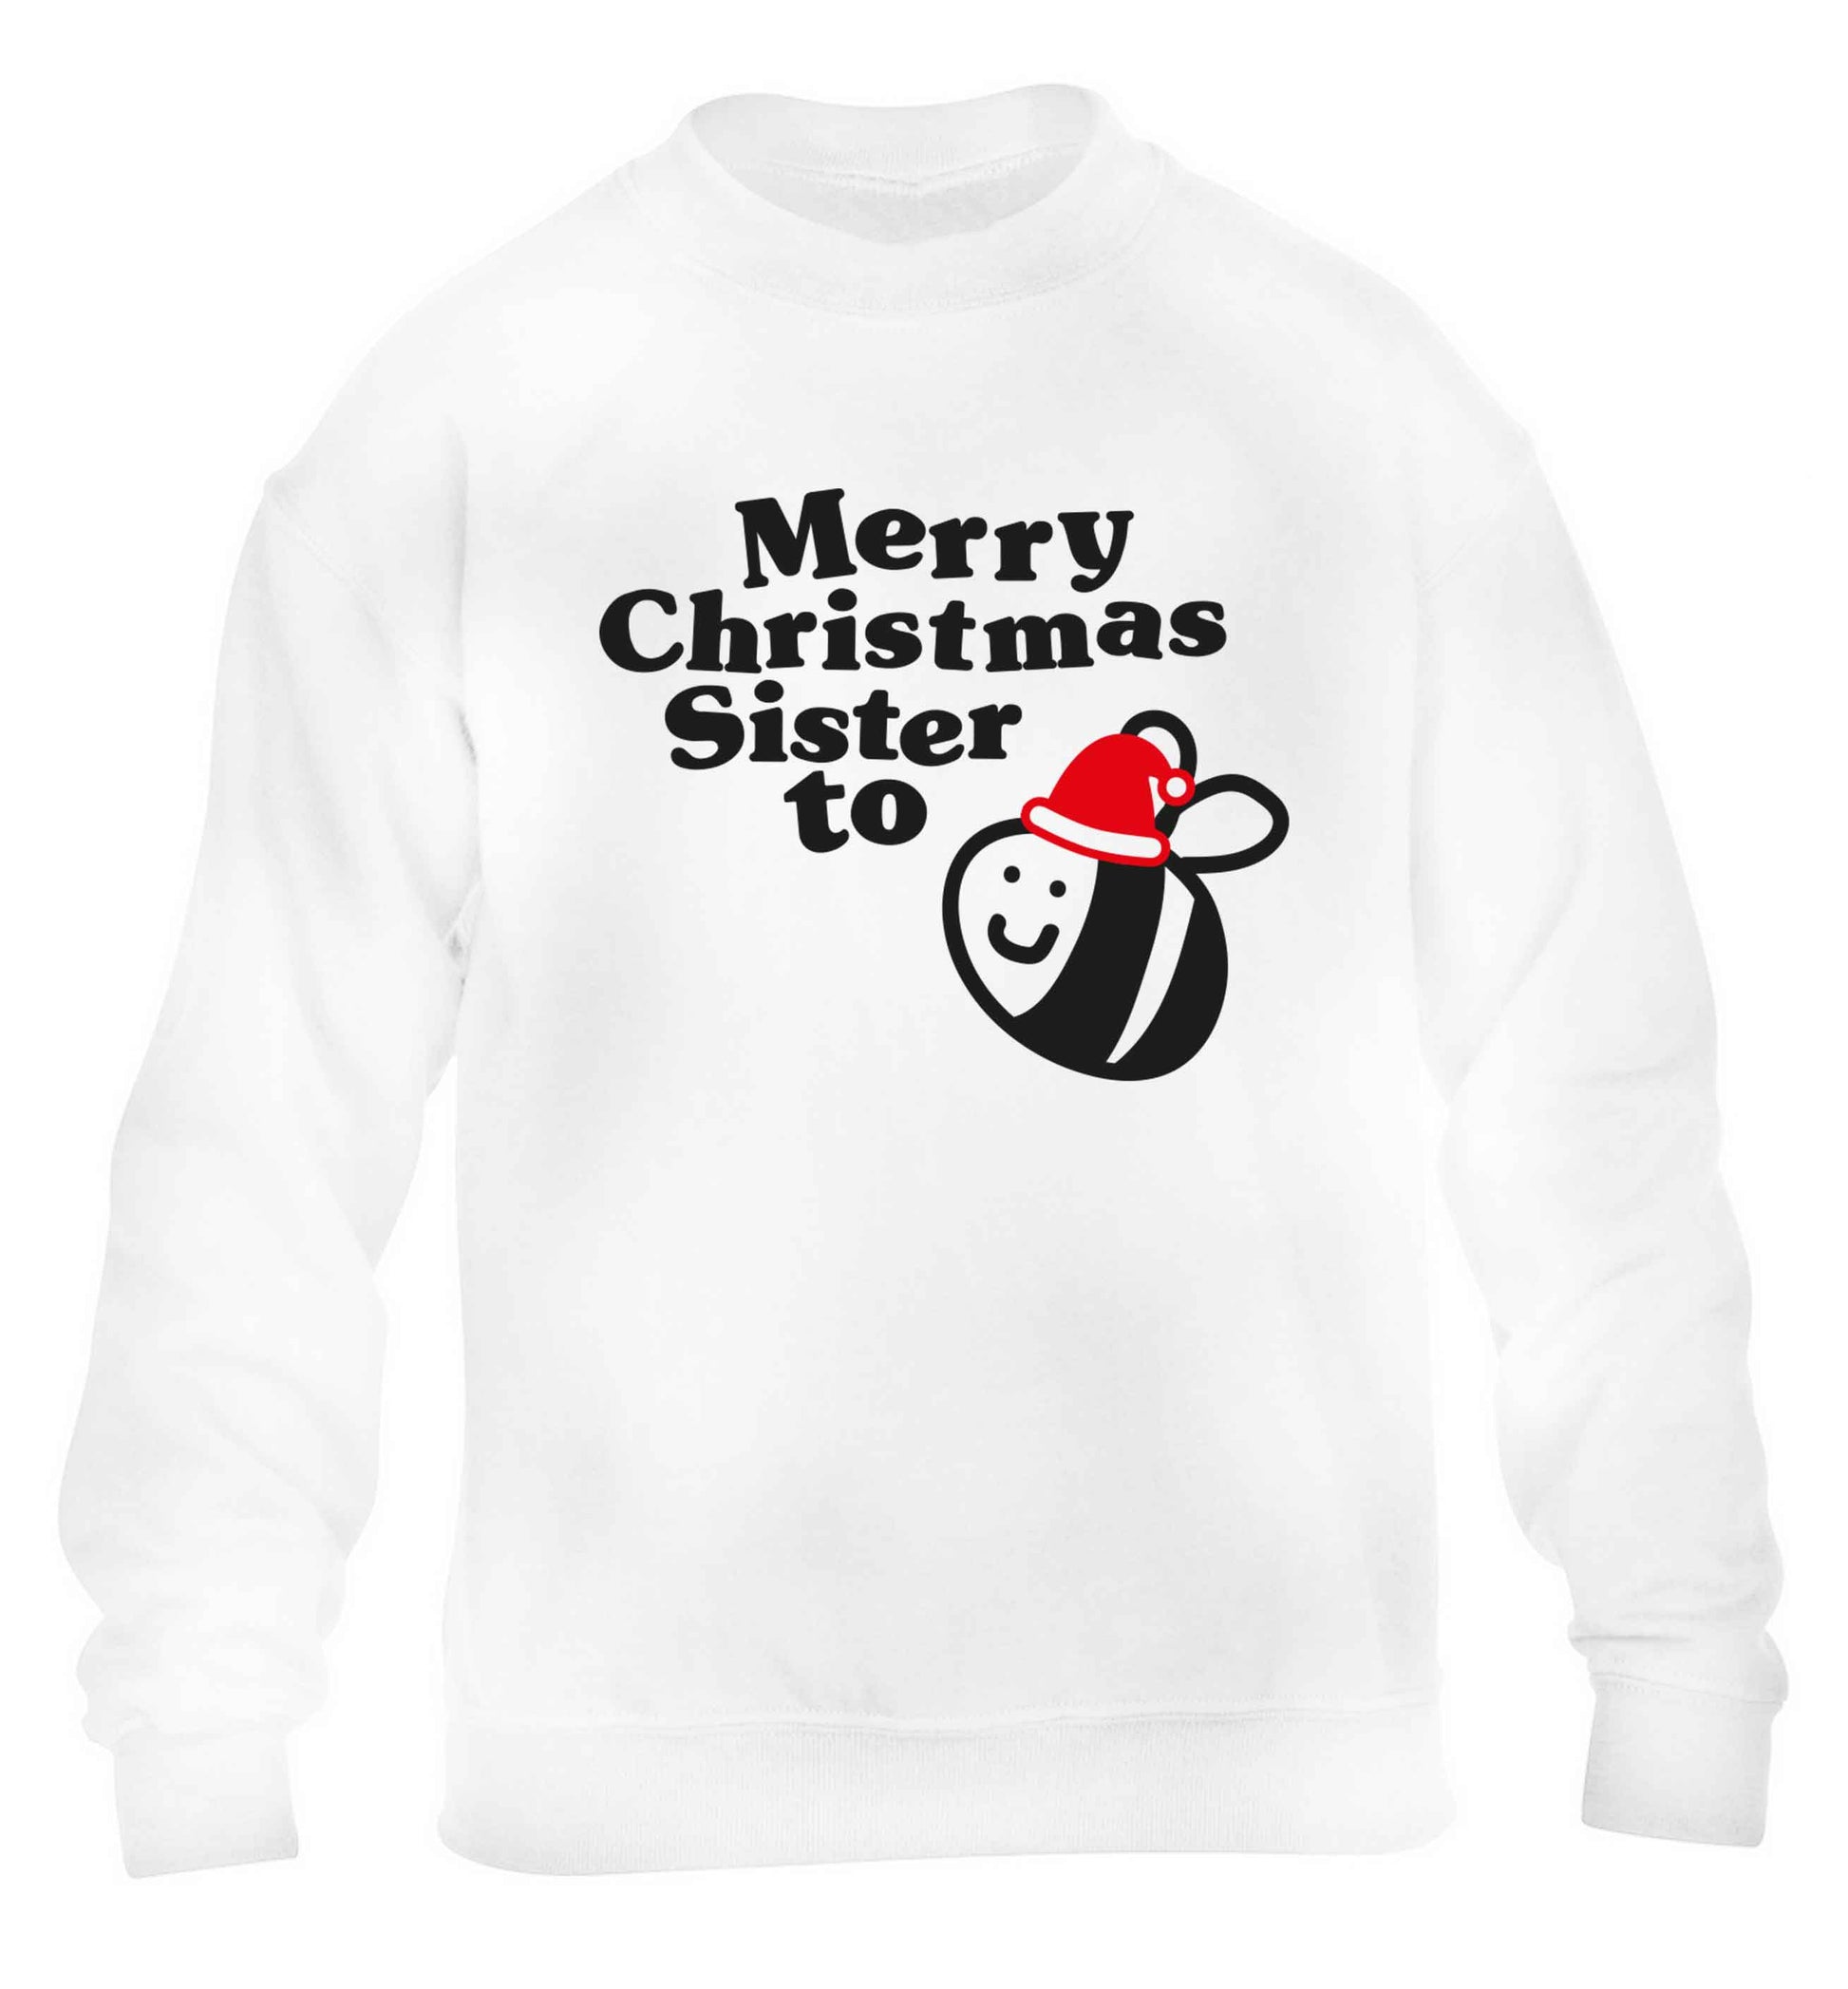 Merry Christmas sister to be children's white sweater 12-13 Years